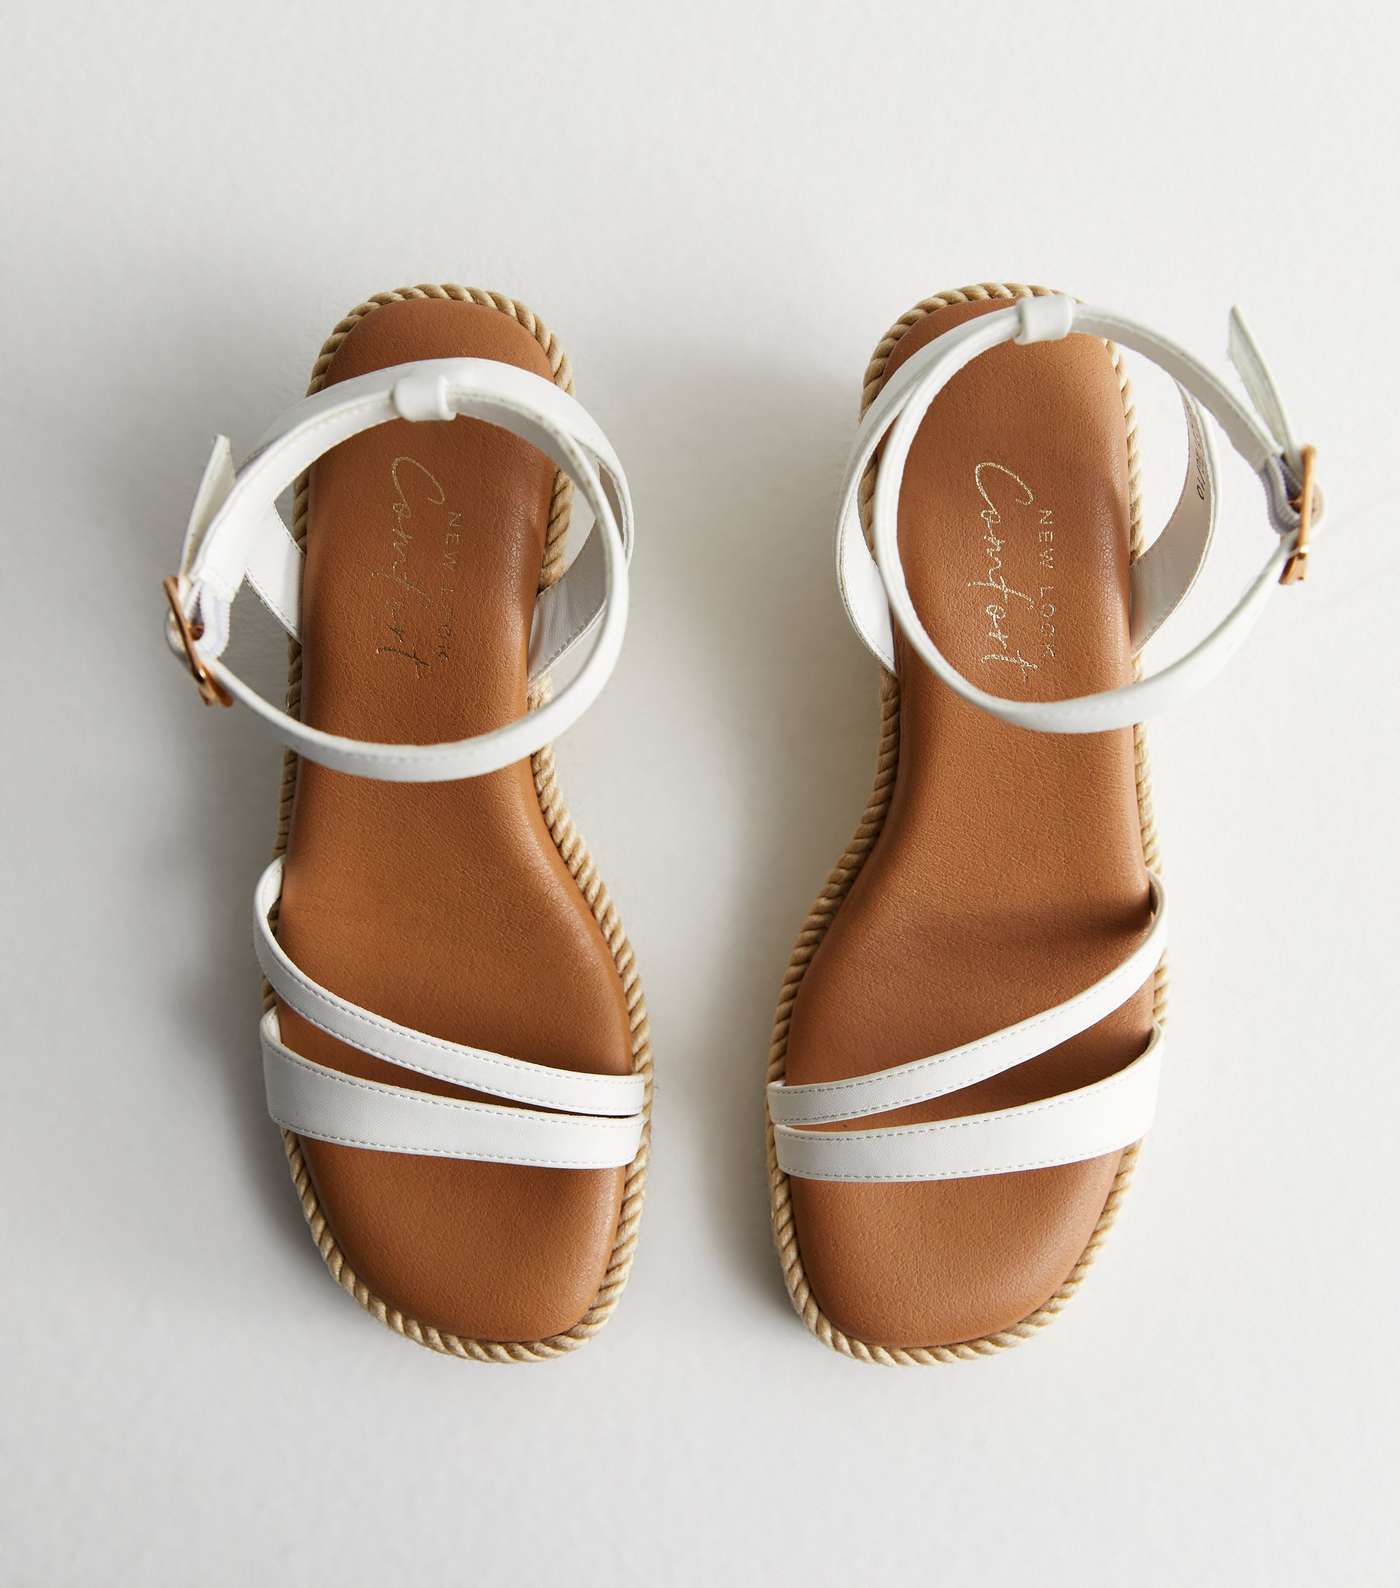 White Leather-Look Strappy Espadrille Wedge Heel Sandals Image 3